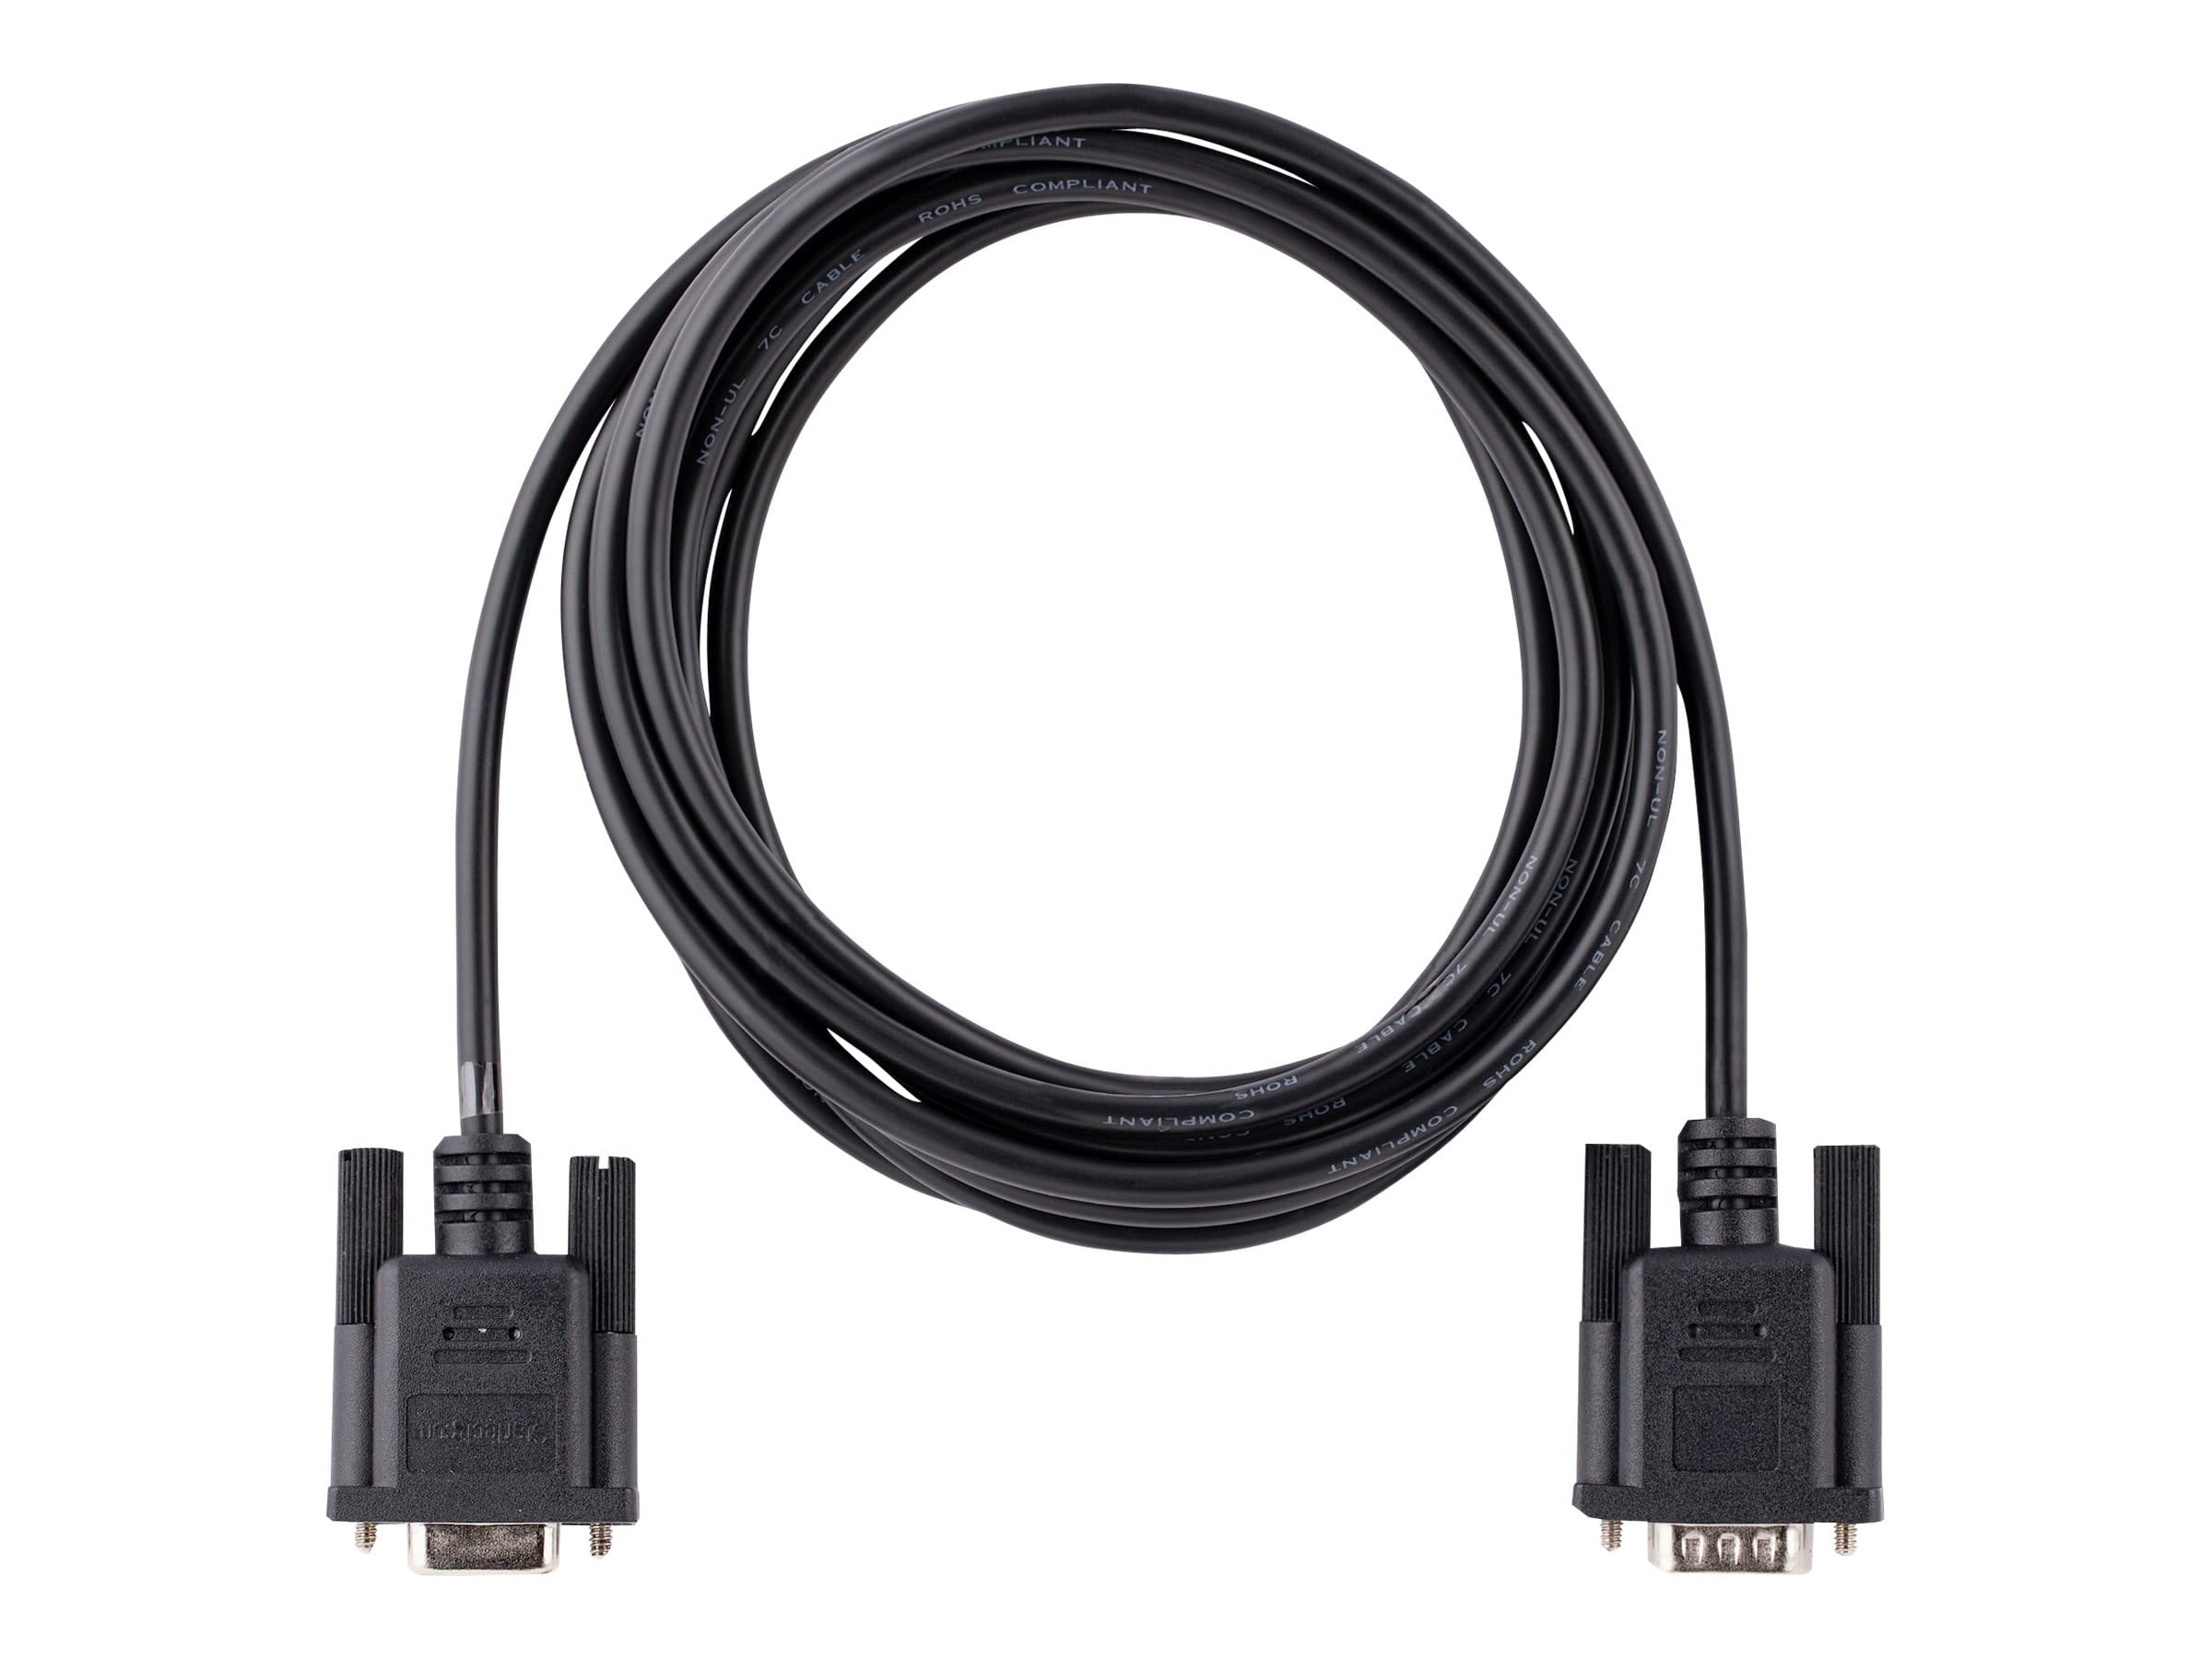 StarTech.com 3m RS232 Serial Null Modem Cable, Crossover Serial Cable w/Al-Mylar Shielding, DB9 Serial COM Port Cable Female to Male, Compatible w/DTE Devices - Tool-Less Design w/Thumbscrews, Black, F/M (9FMNM-3M-RS232-CABLE)